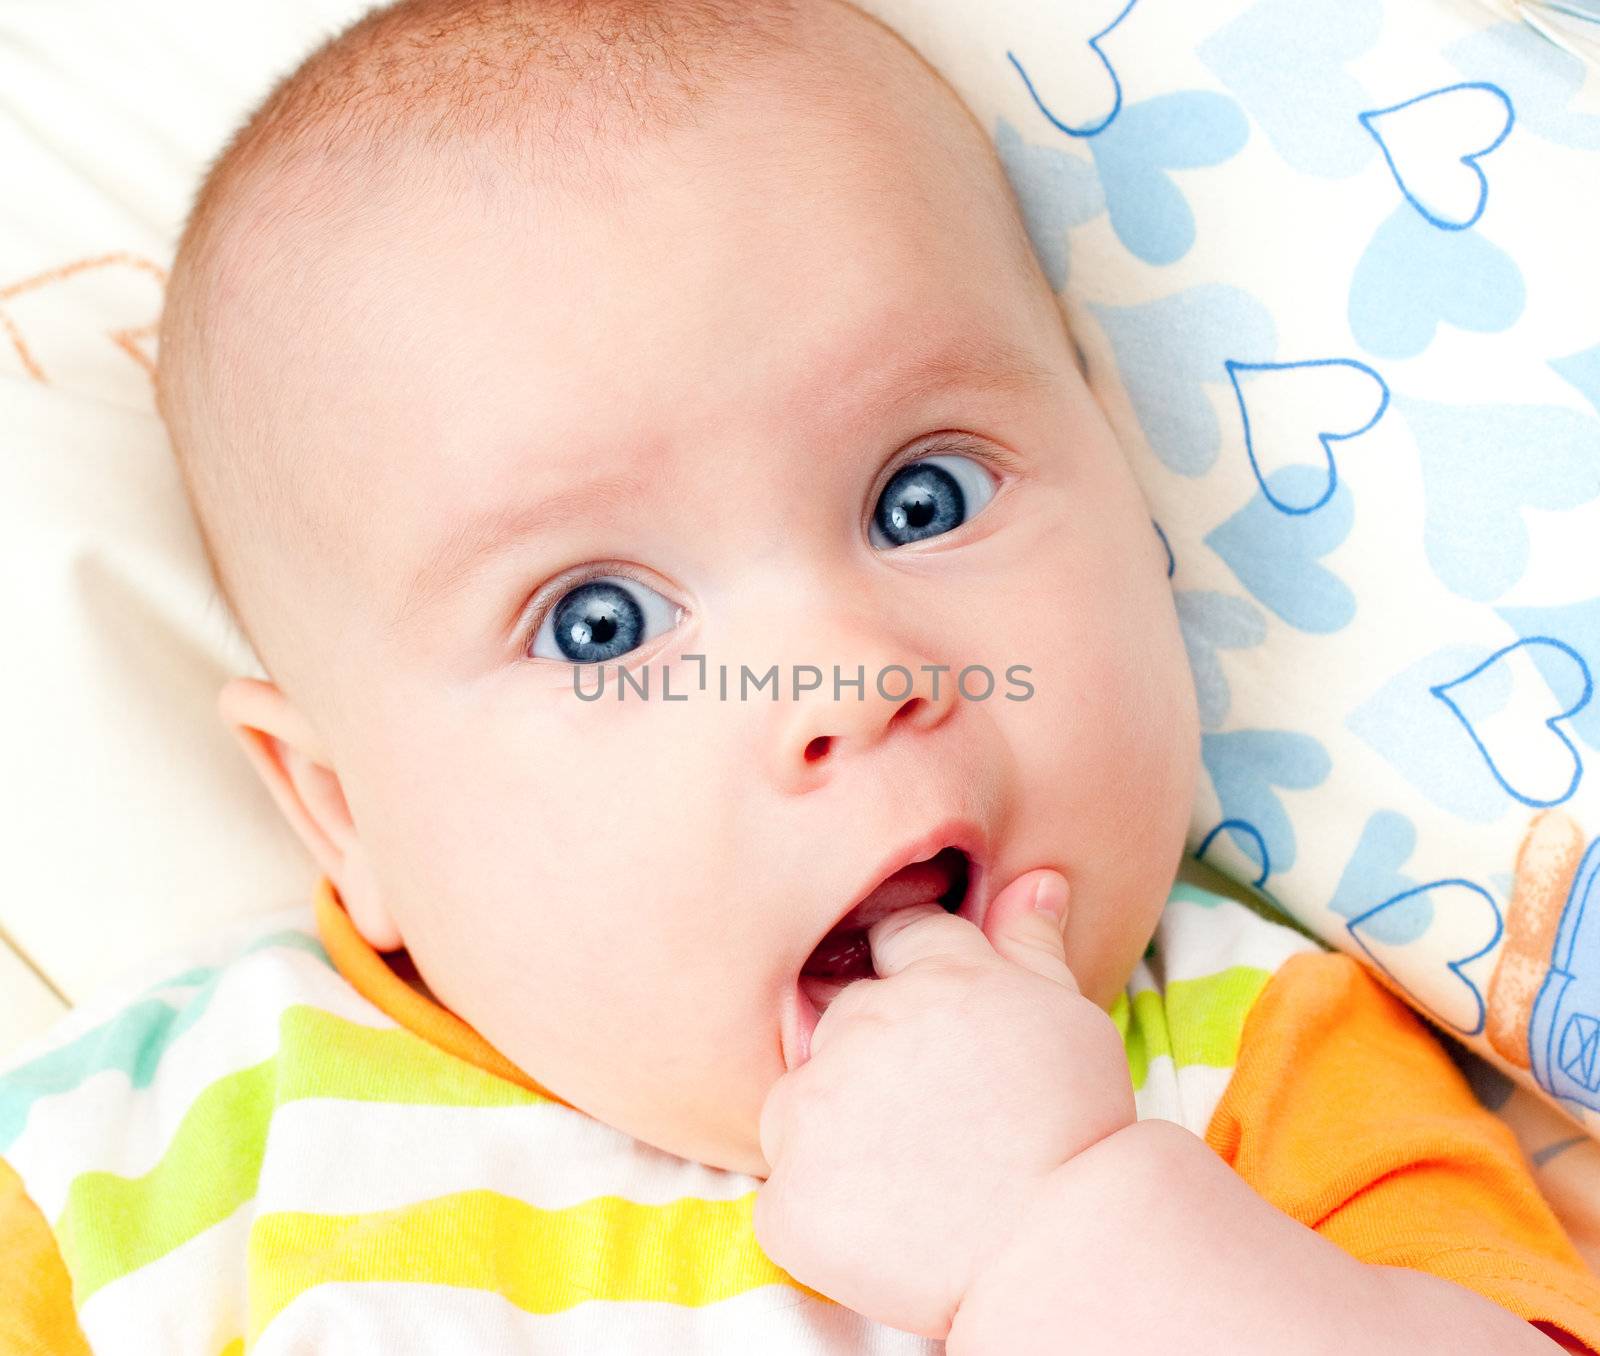 Infant with hand in mouth by naumoid